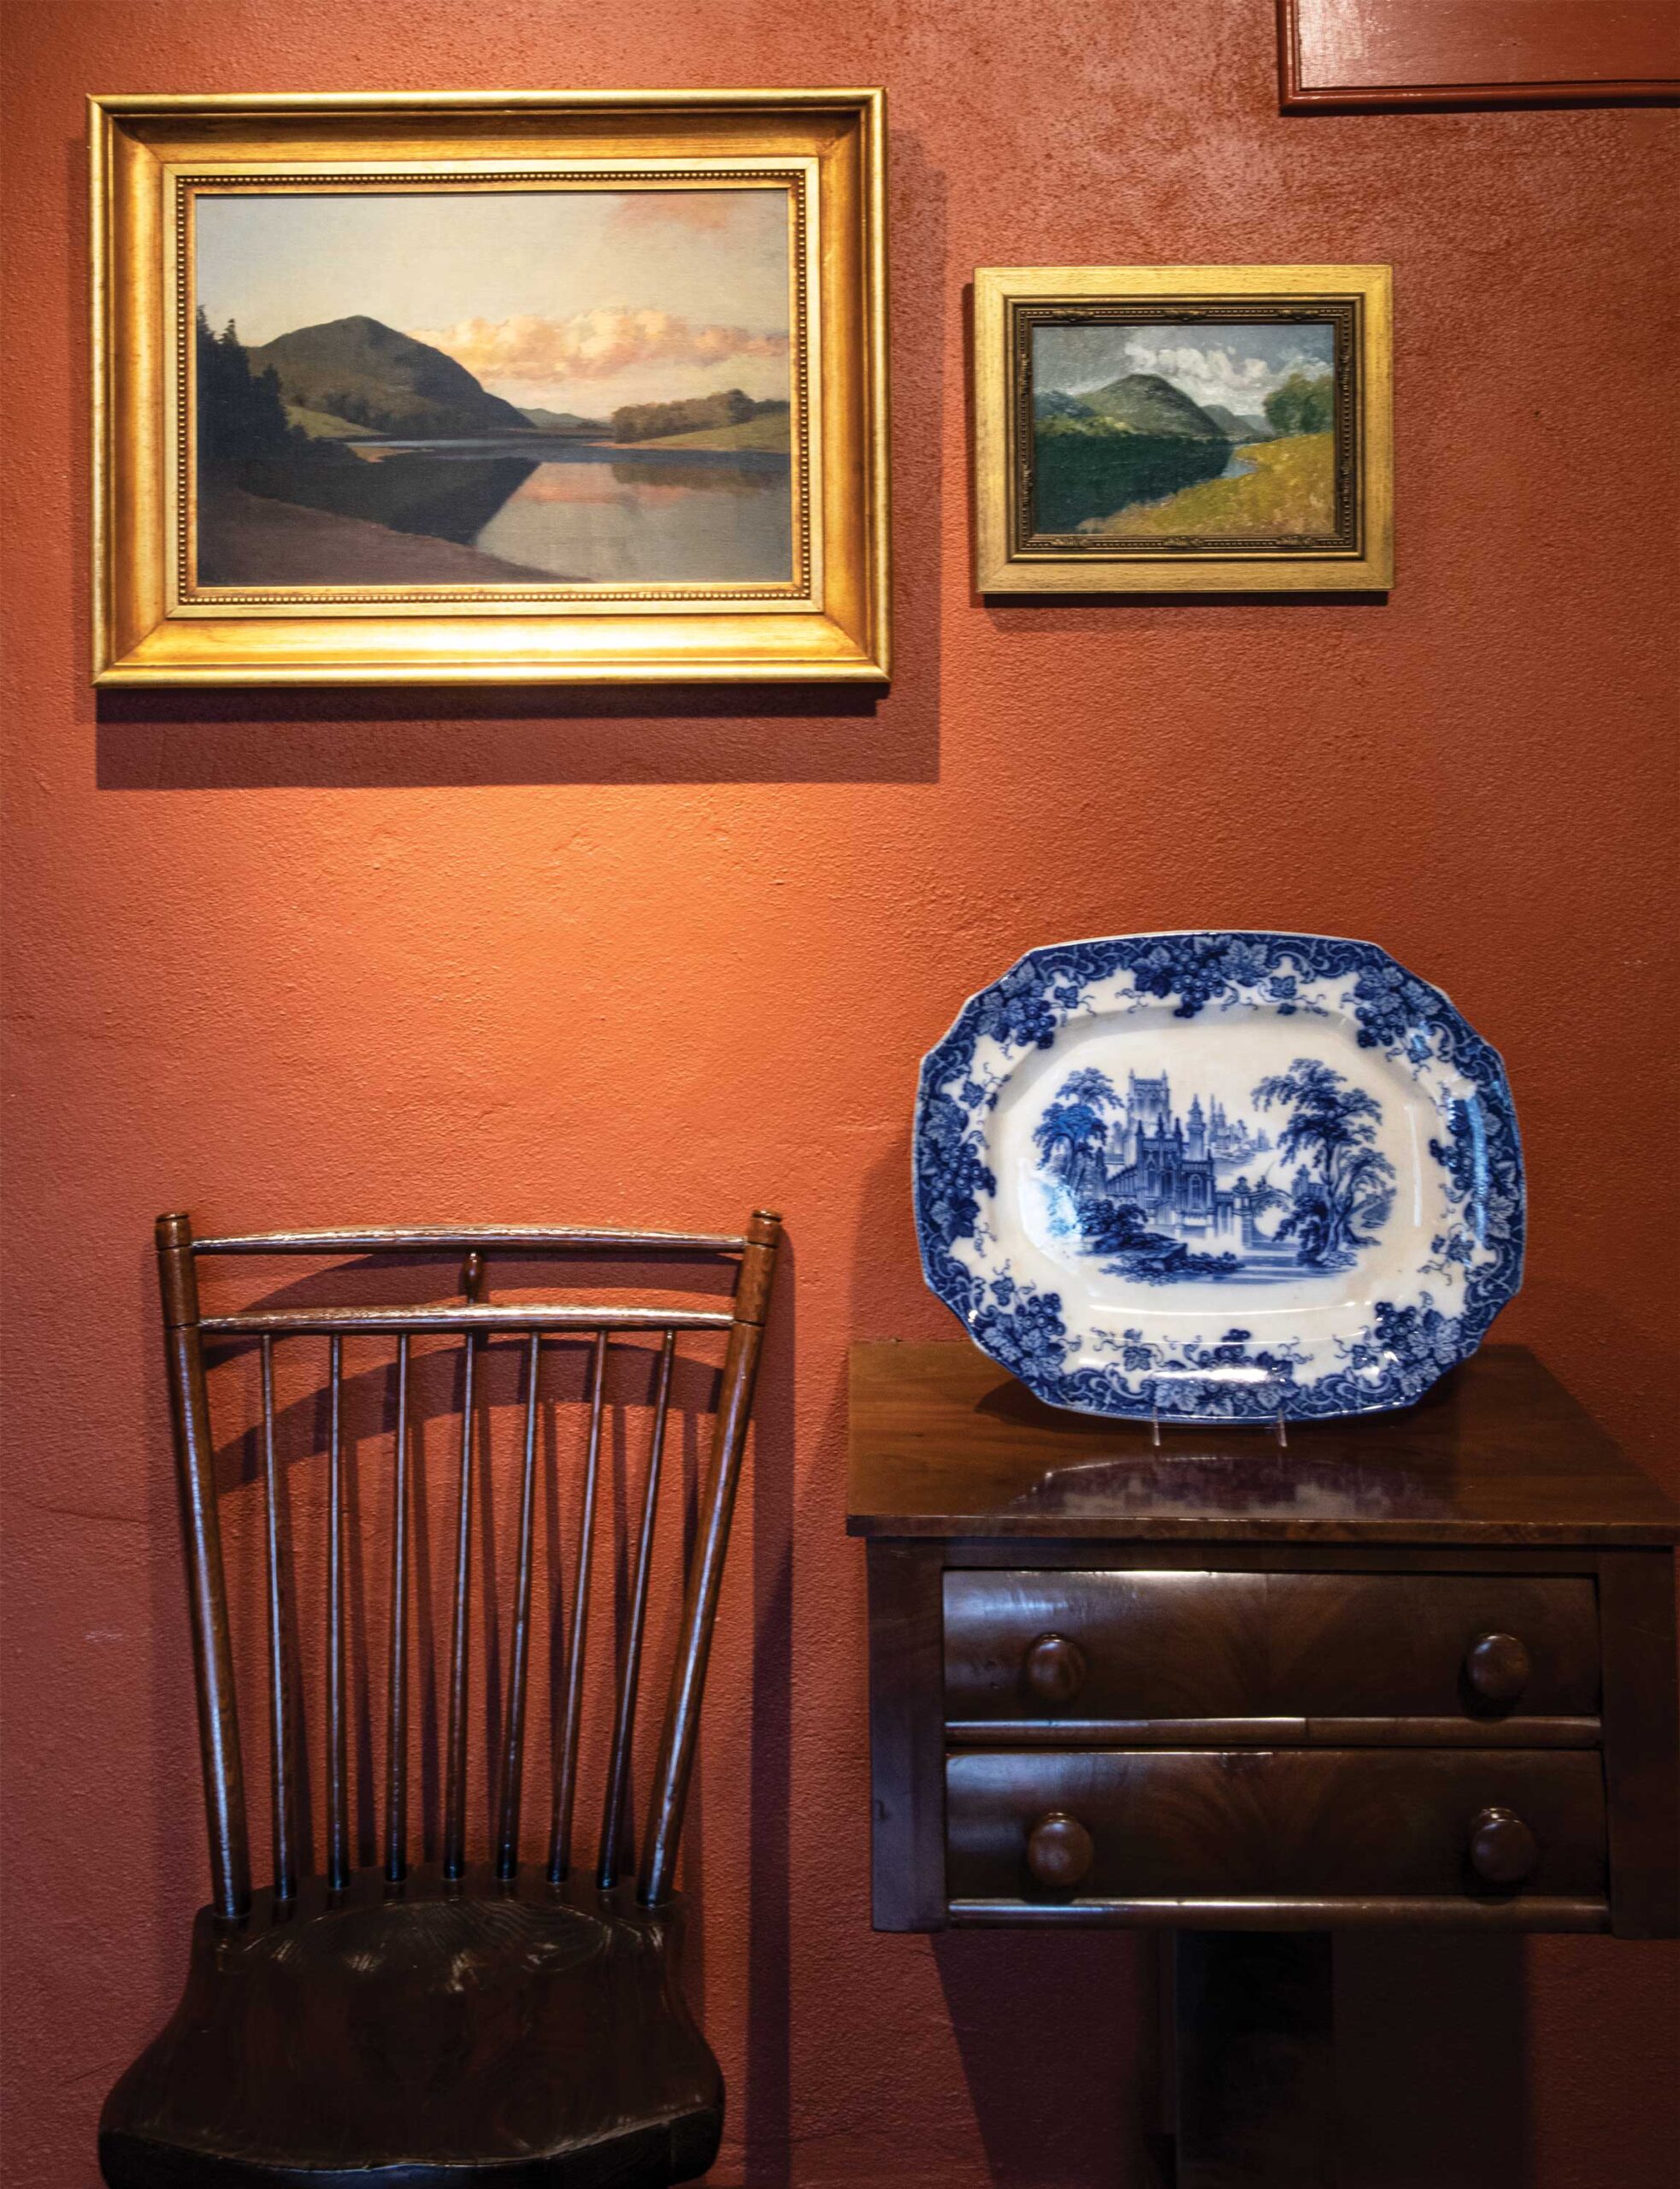 John F. Peto’s "Harper’s Ferry, West Virginia" (left) and "Study for Harper’s Ferry, West Virginia" hang above a vintage chair, heirloom blue-and-white platter, and antique side table.